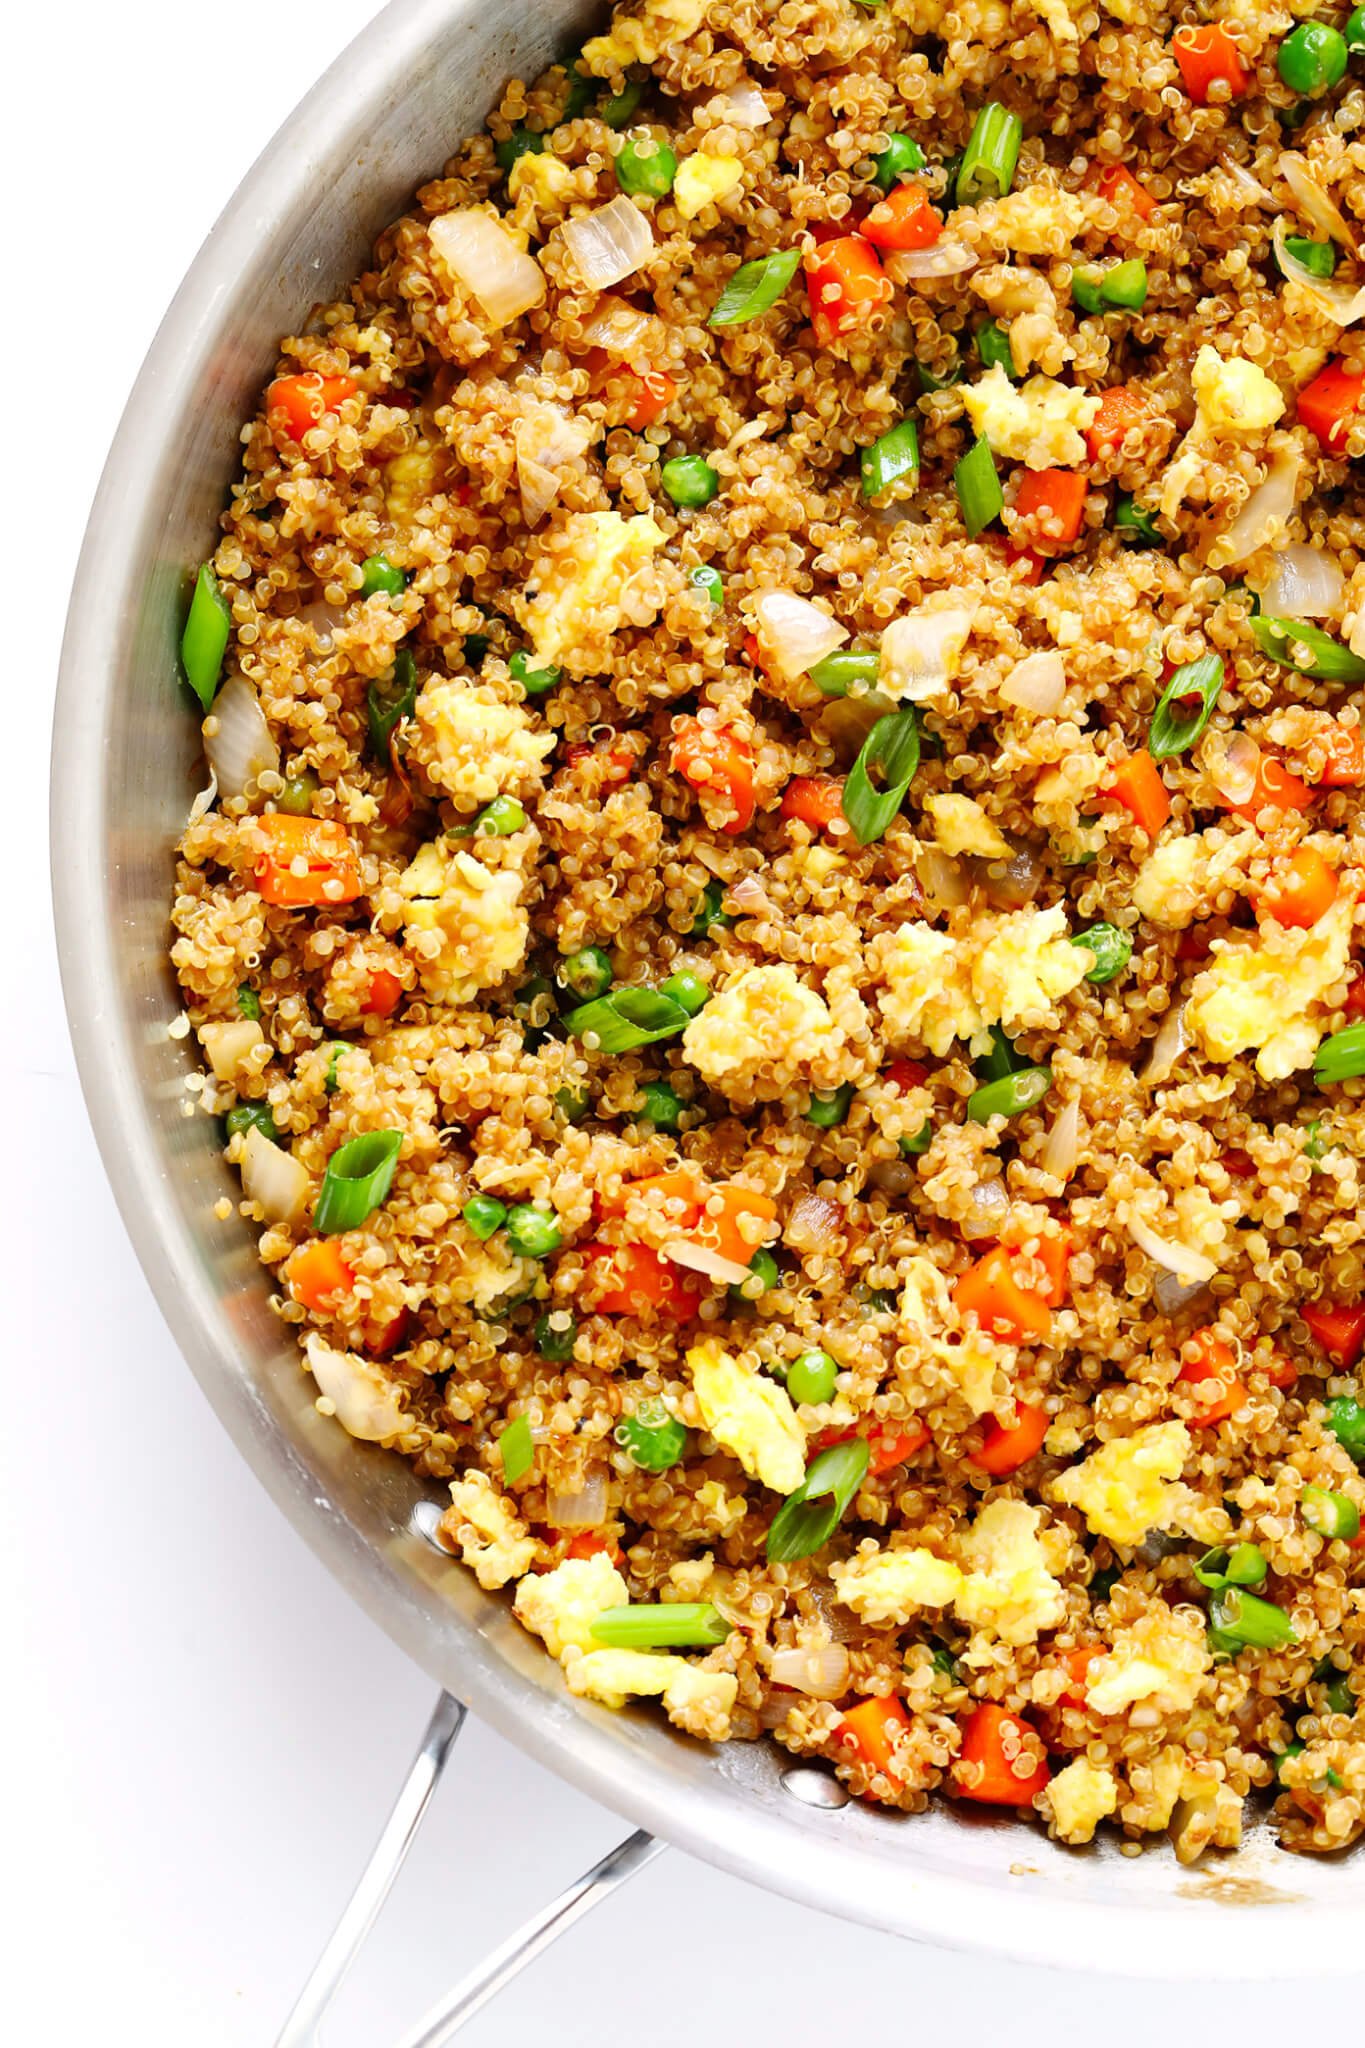 This 15-Minute Quinoa Fried "Rice" recipe is the best!! It's super easy to make, full of big flavors, and it's the perfect side or main dish. Feel free to add chicken, pork, tofu, shrimp, beef, or veggies if you'd like! | gimmesomeoven.com (Vegetarian)